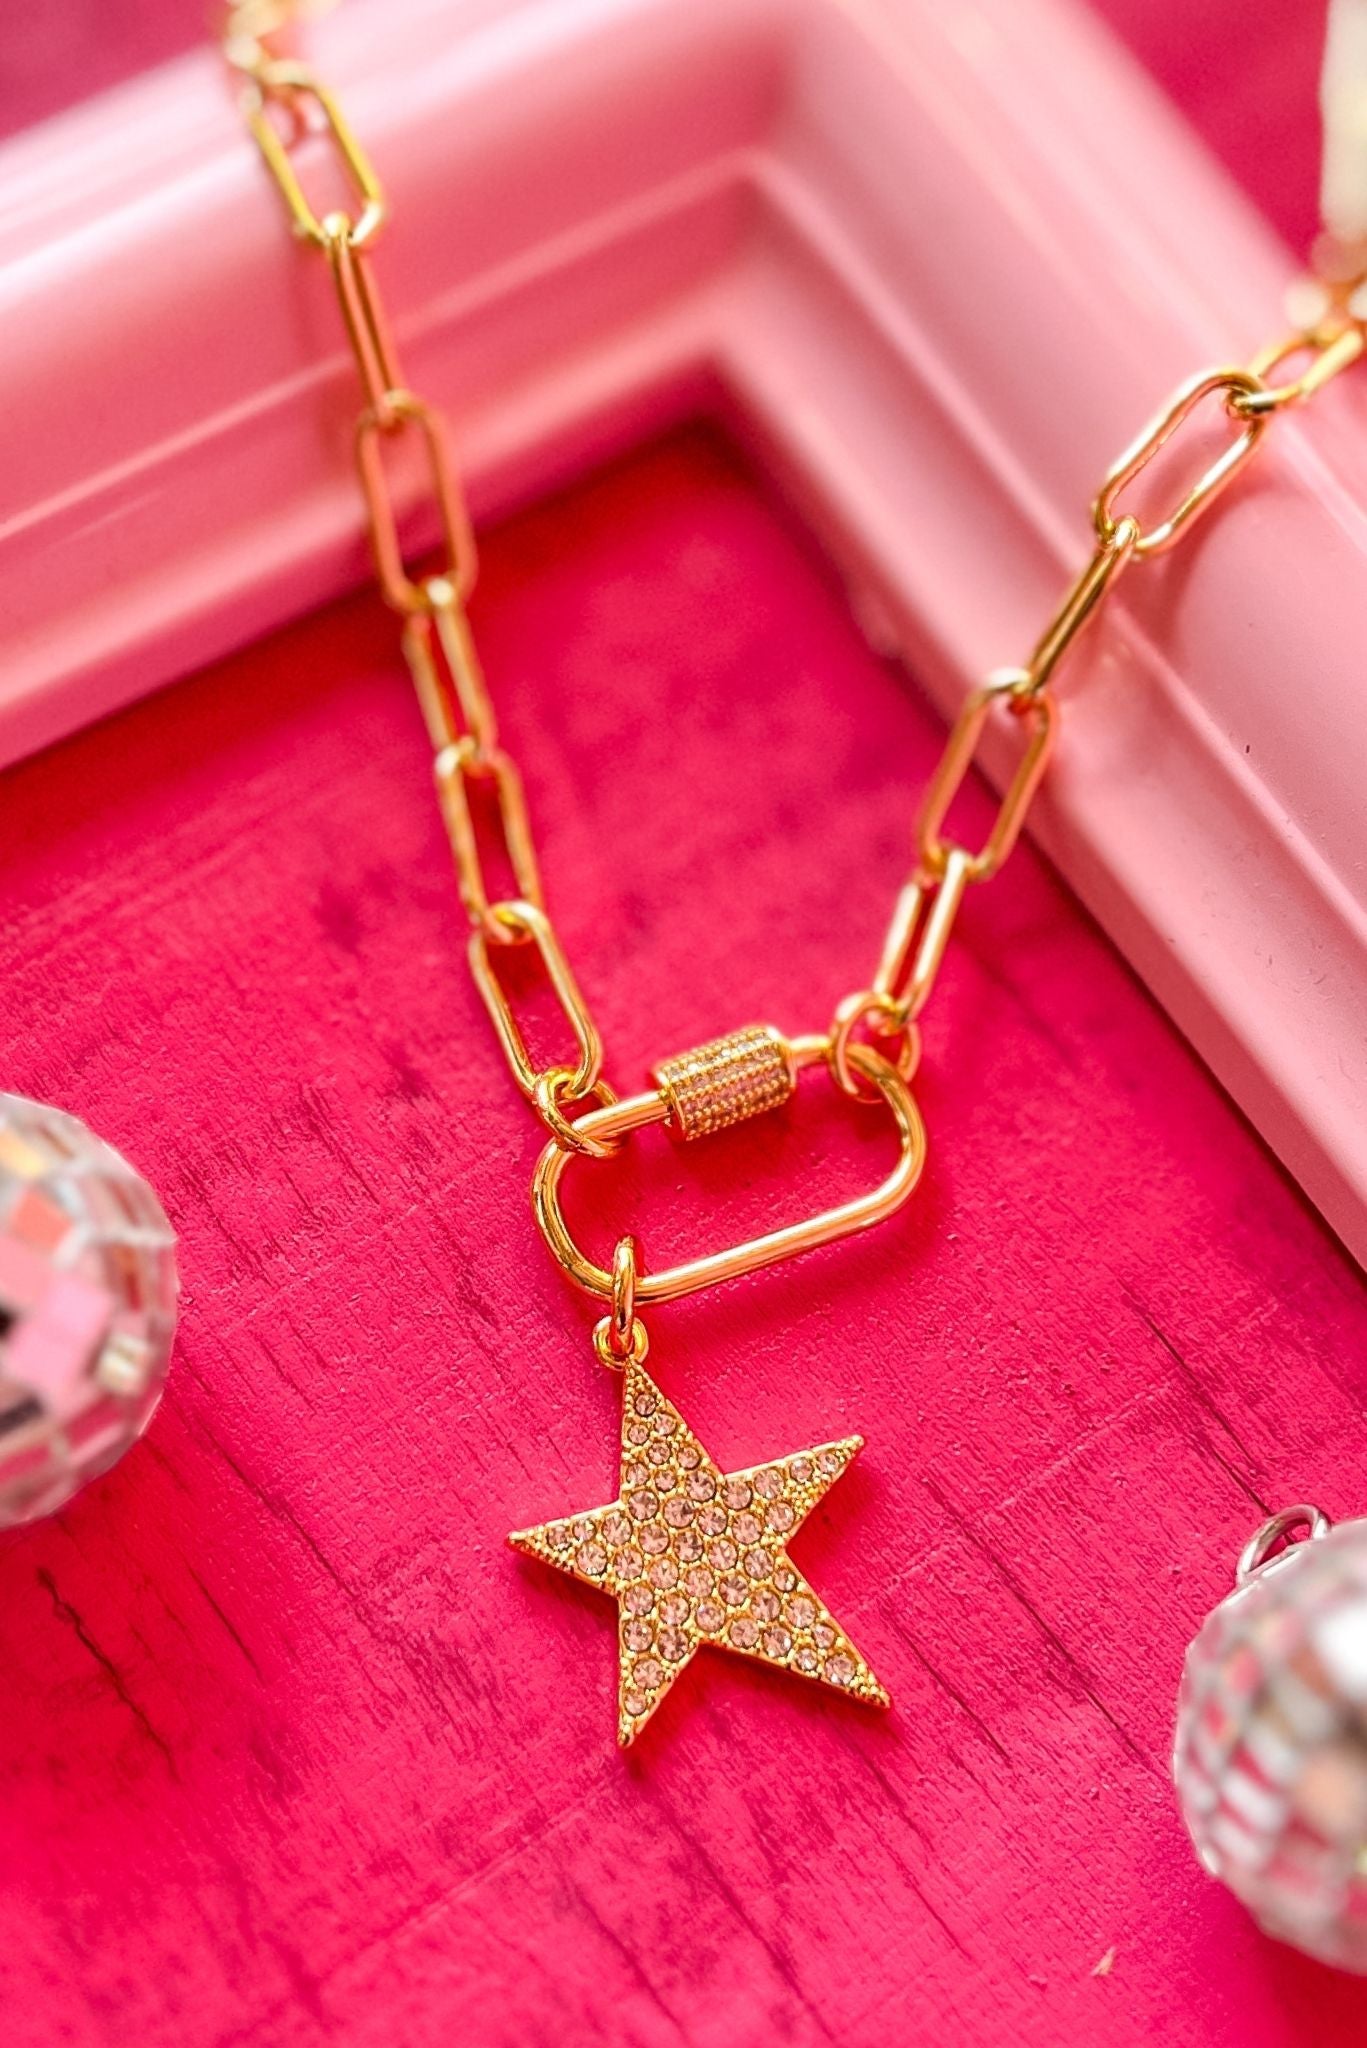 SSYS Scripture Star Charm, ssys the label, must have charm, must have charm necklace, elevated charm, elevated charm necklace, acessories, scripture charm, scripture, gift, mom style, shop style your senses by mallory fitzsimmons